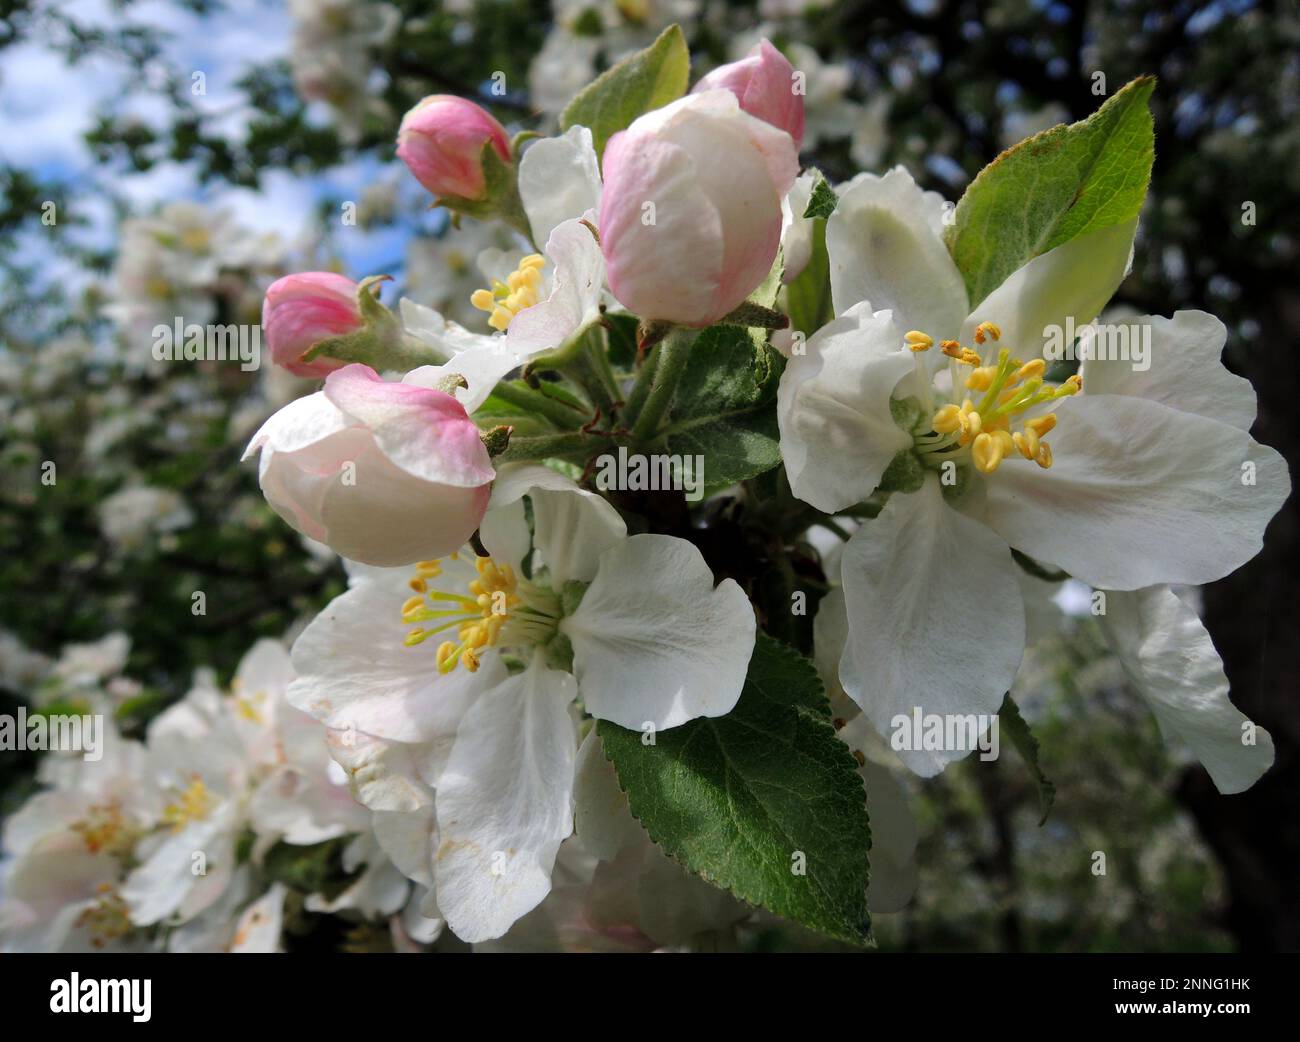 Macro shot of inflorescence with petals and stamens of an apple tree flower Stock Photo